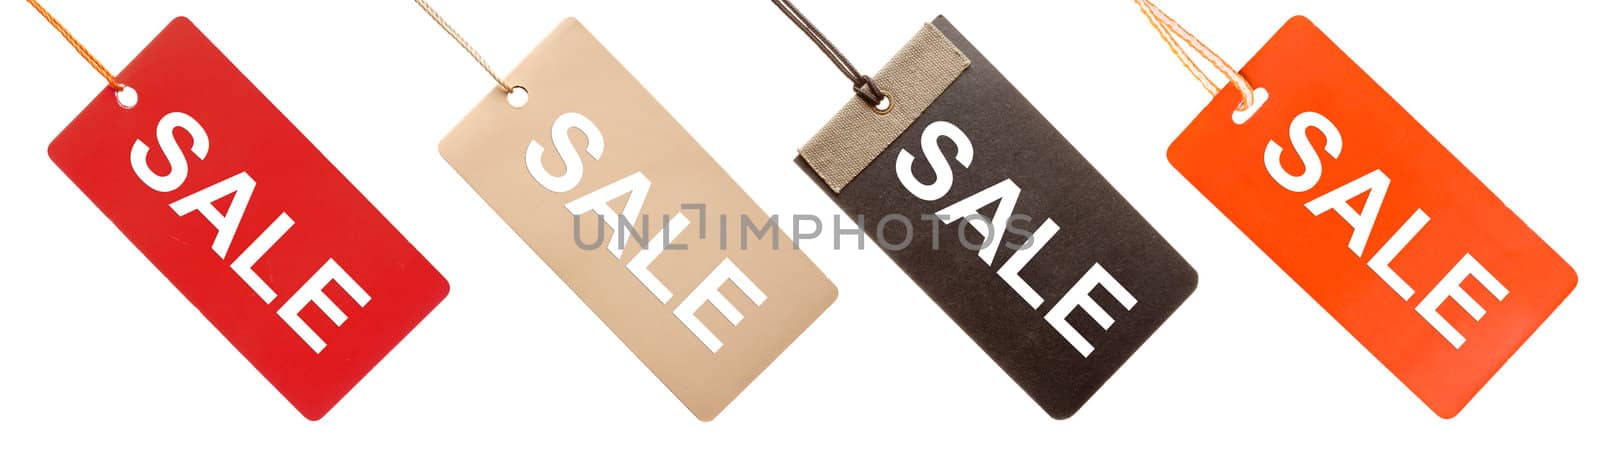 Set of paper tags with "Sale" written on them  isolated on white background